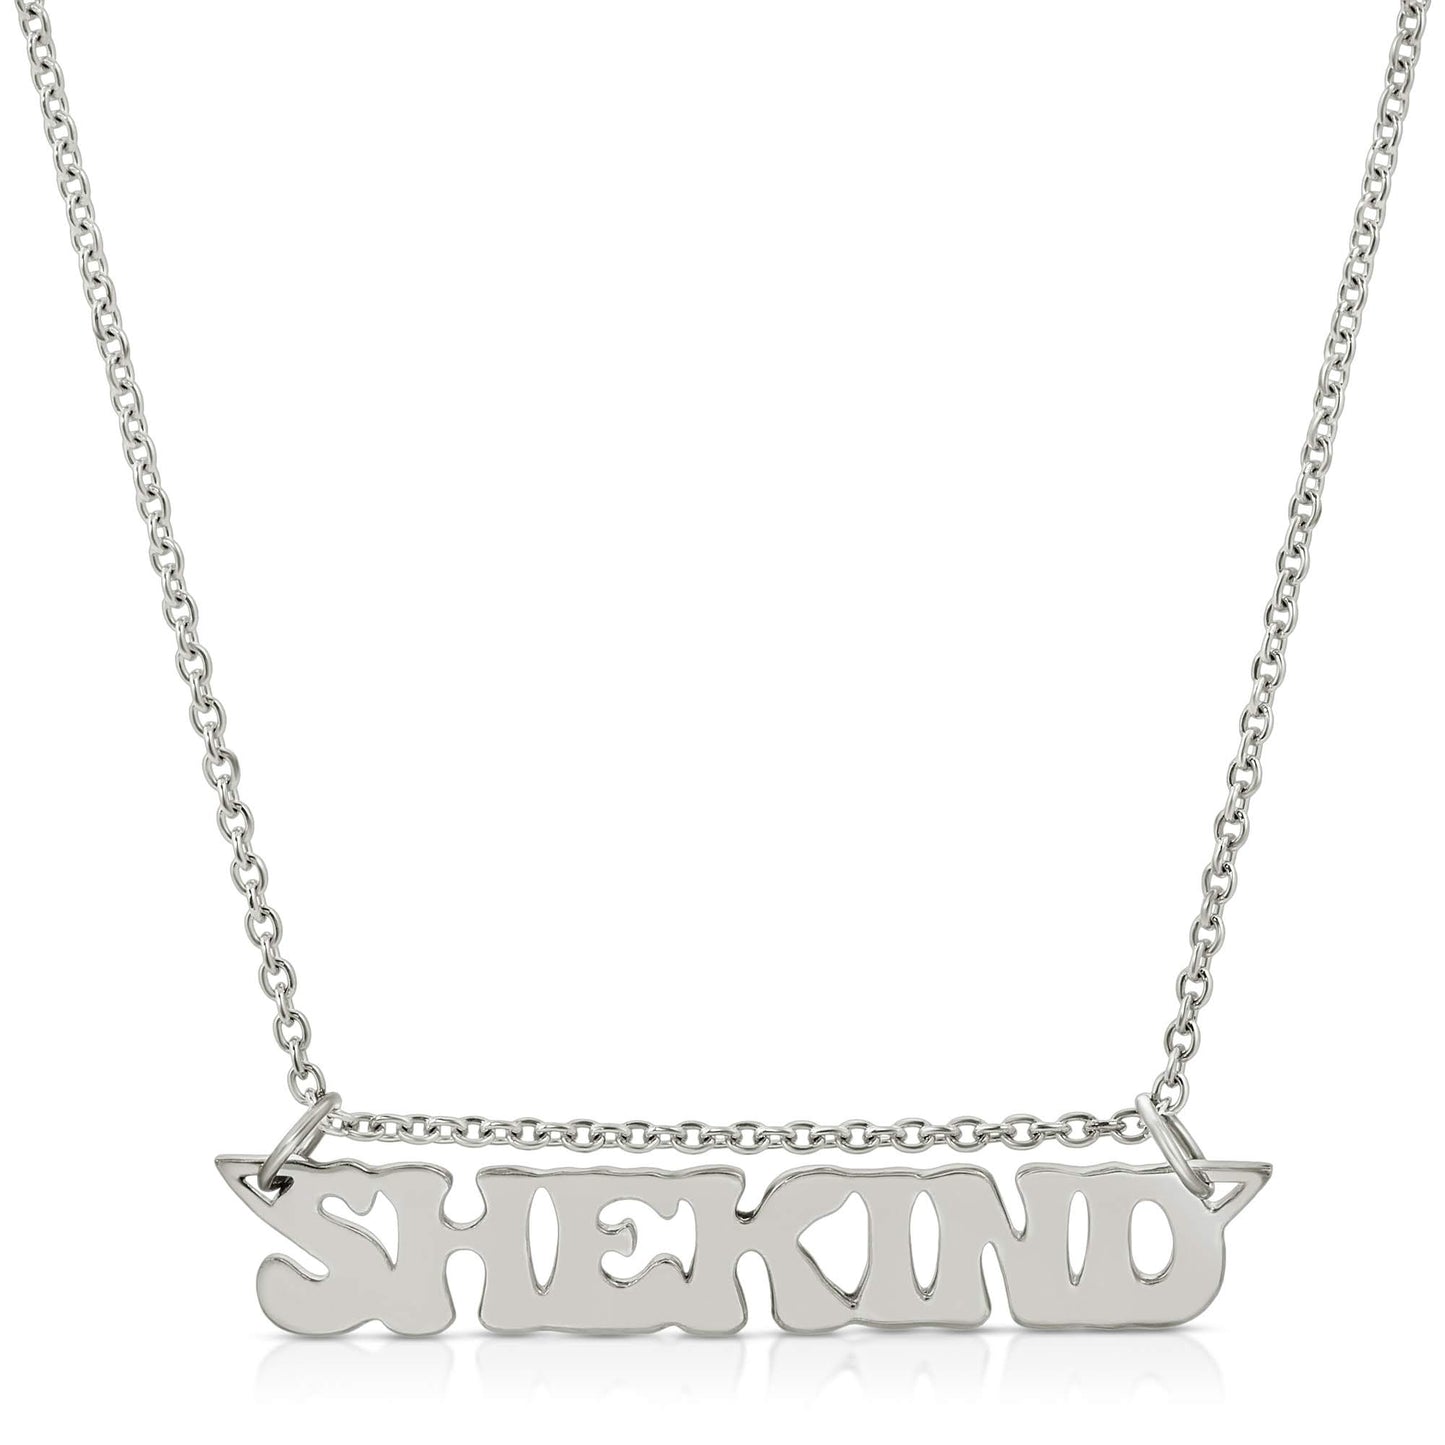 18K solid white gold name plate necklace that says shekind